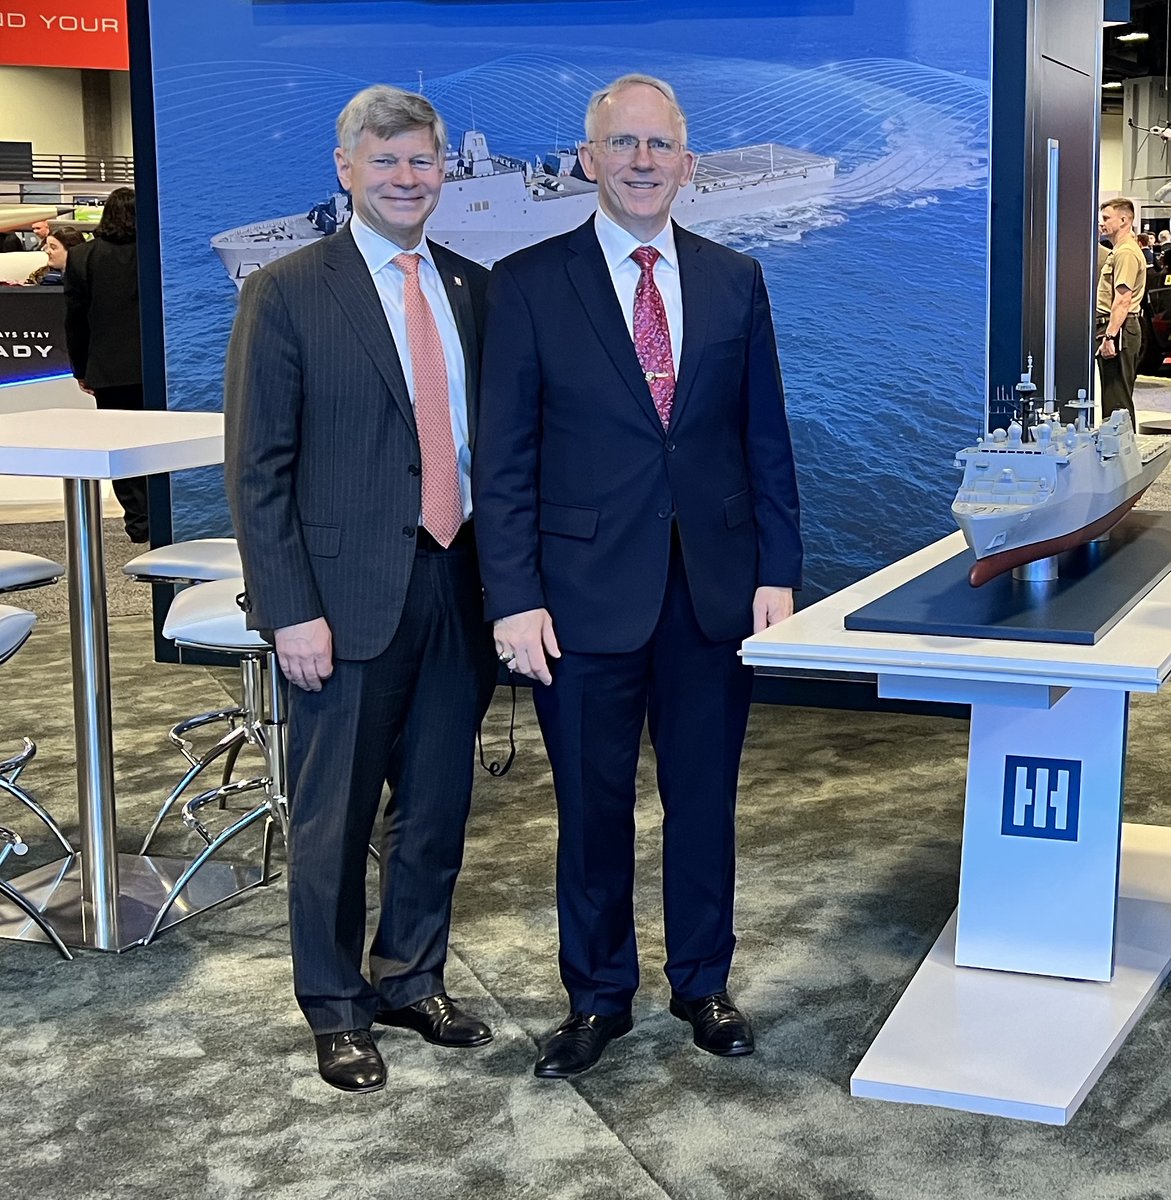 Stop by Booth #2117 from now until Thursday, May 2, to learn more about how we’re dedicated to empowering the @USMC and @USNavy team with cutting-edge advancements.

#MDM24 #ModernDayMarine #DeliveringTheAdvantage #FromSeaToSpace